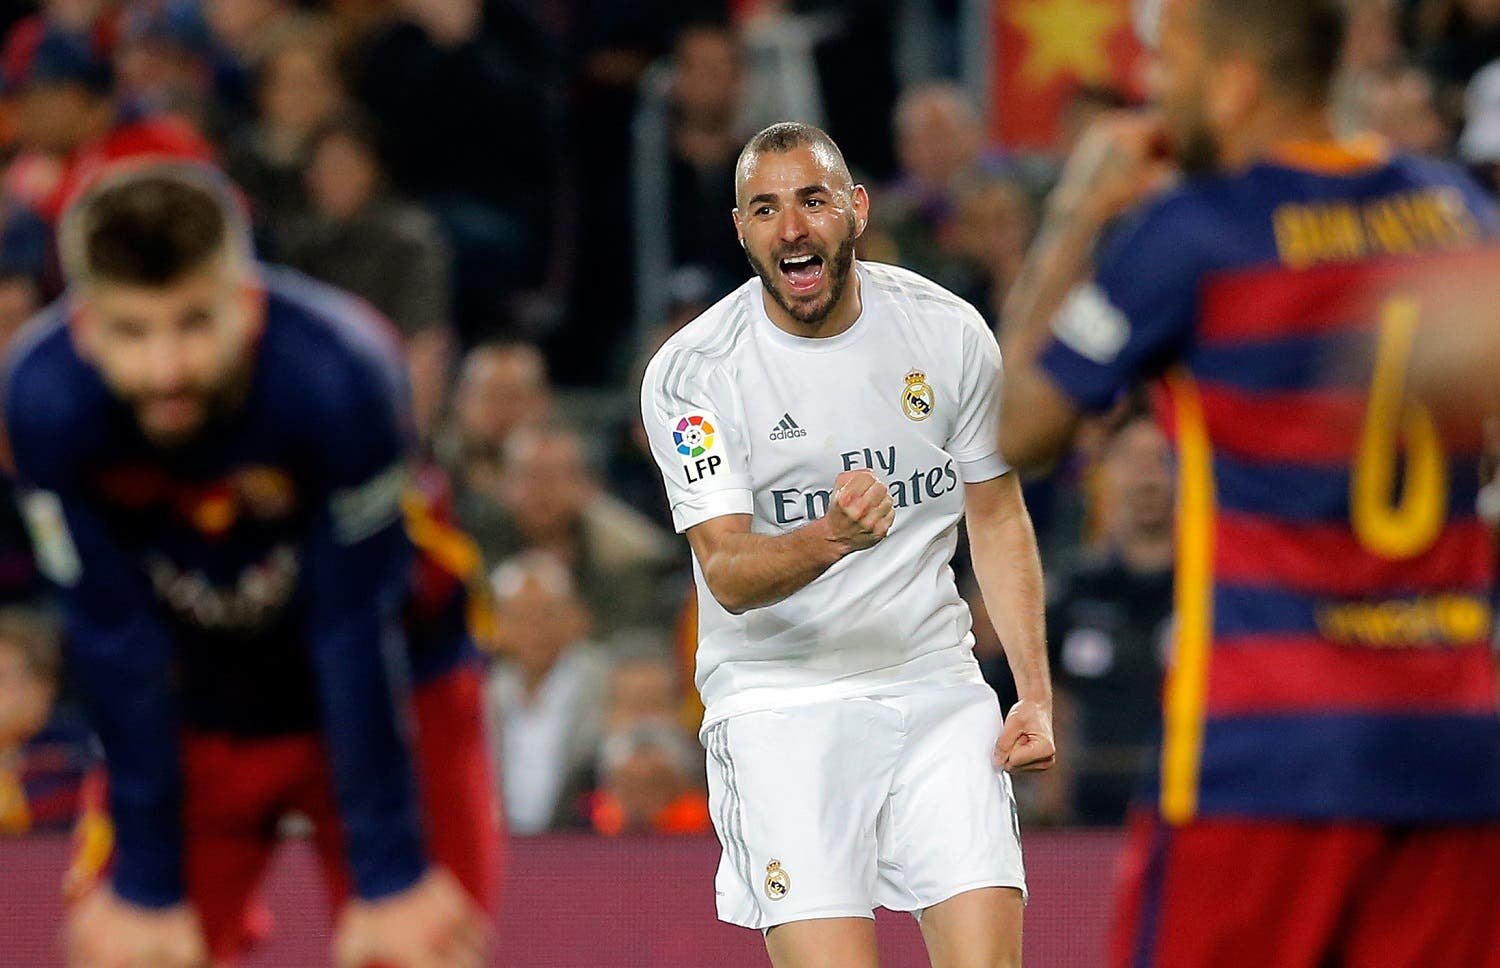 Real Madrid's Karim Benzema, center, celebrates after scoring his side’s first goal during a Spanish La Liga soccer match between Barcelona and Real Madrid, dubbed 'el clasico', at the Camp Nou stadium in Barcelona, Spain, Saturday, April 2, 2016. (AP)